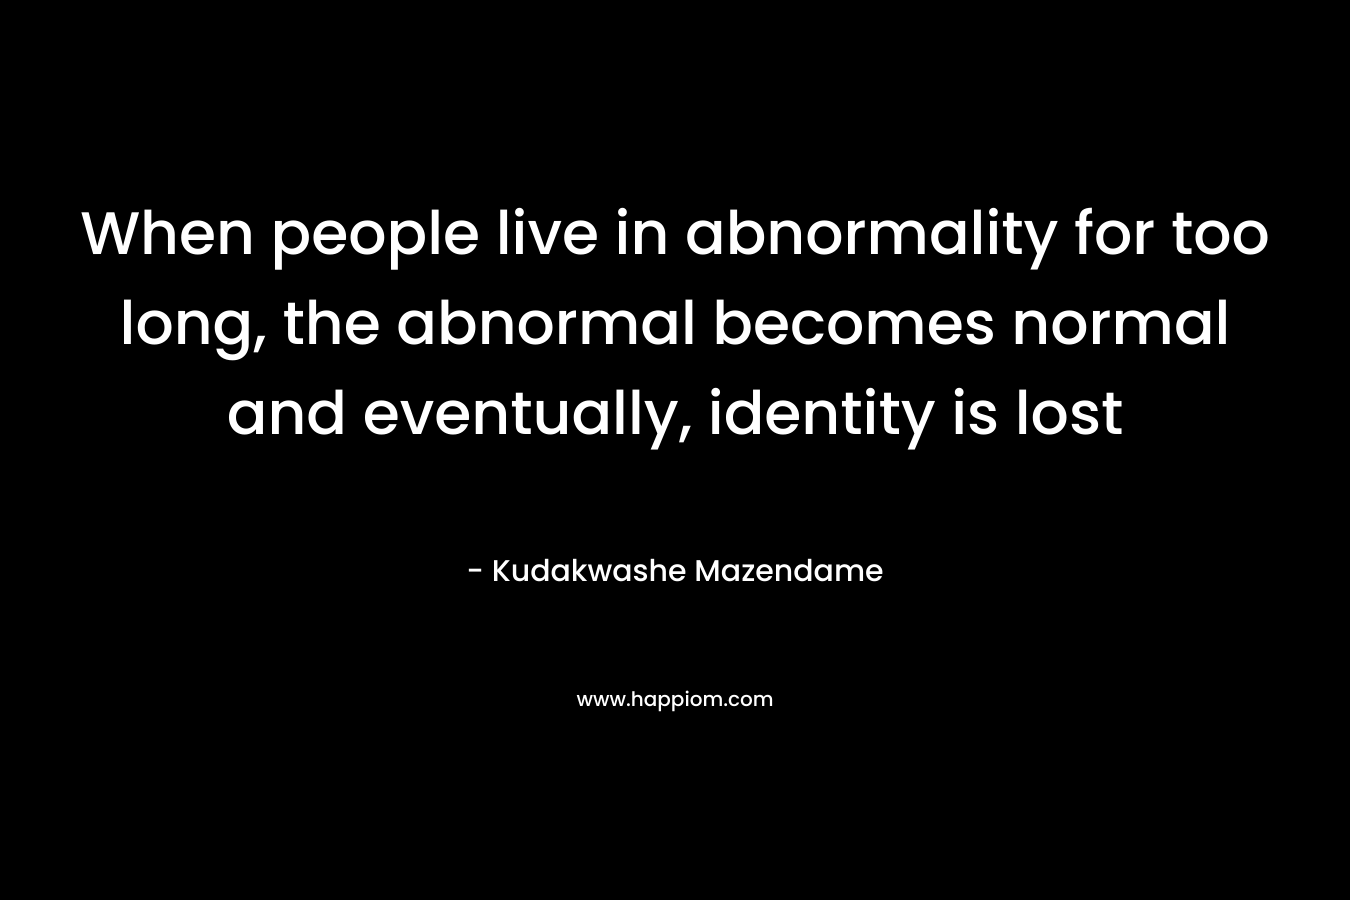 When people live in abnormality for too long, the abnormal becomes normal and eventually, identity is lost